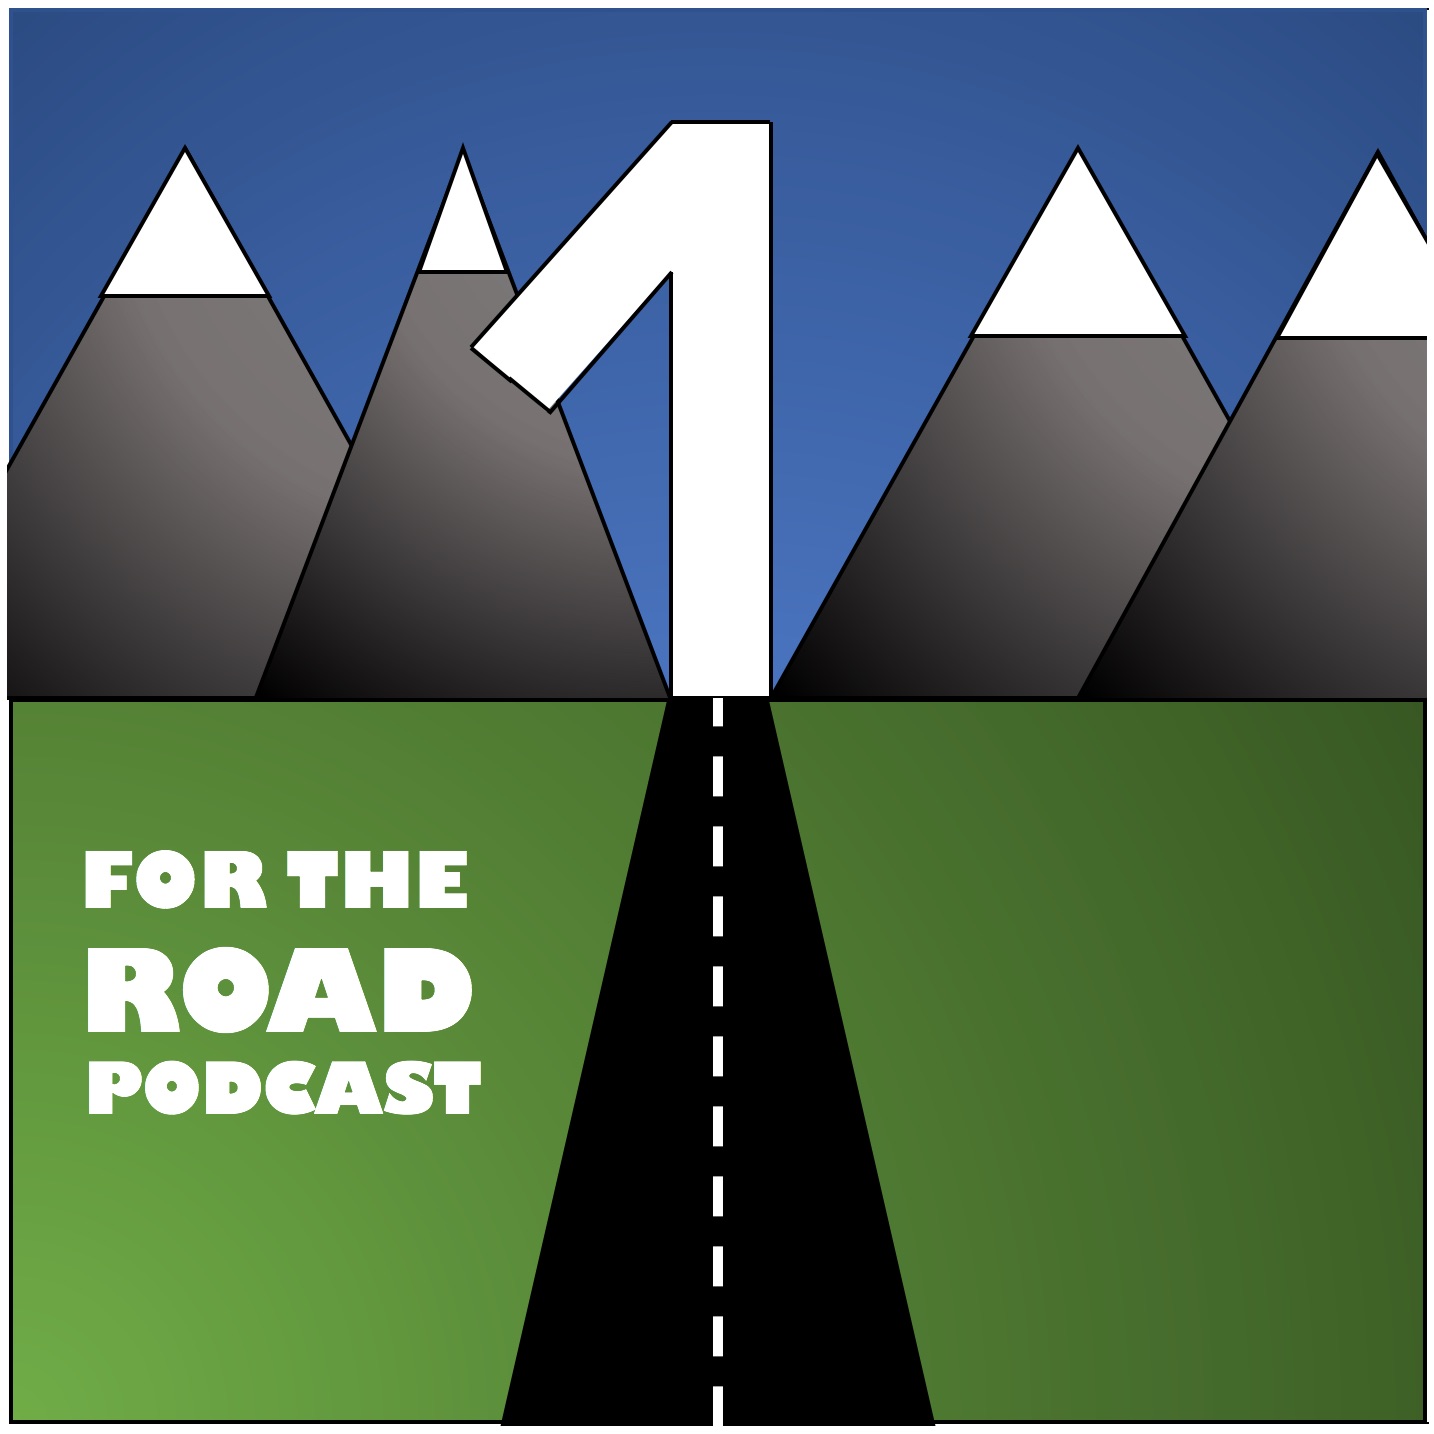 One For The Road Podcast logo